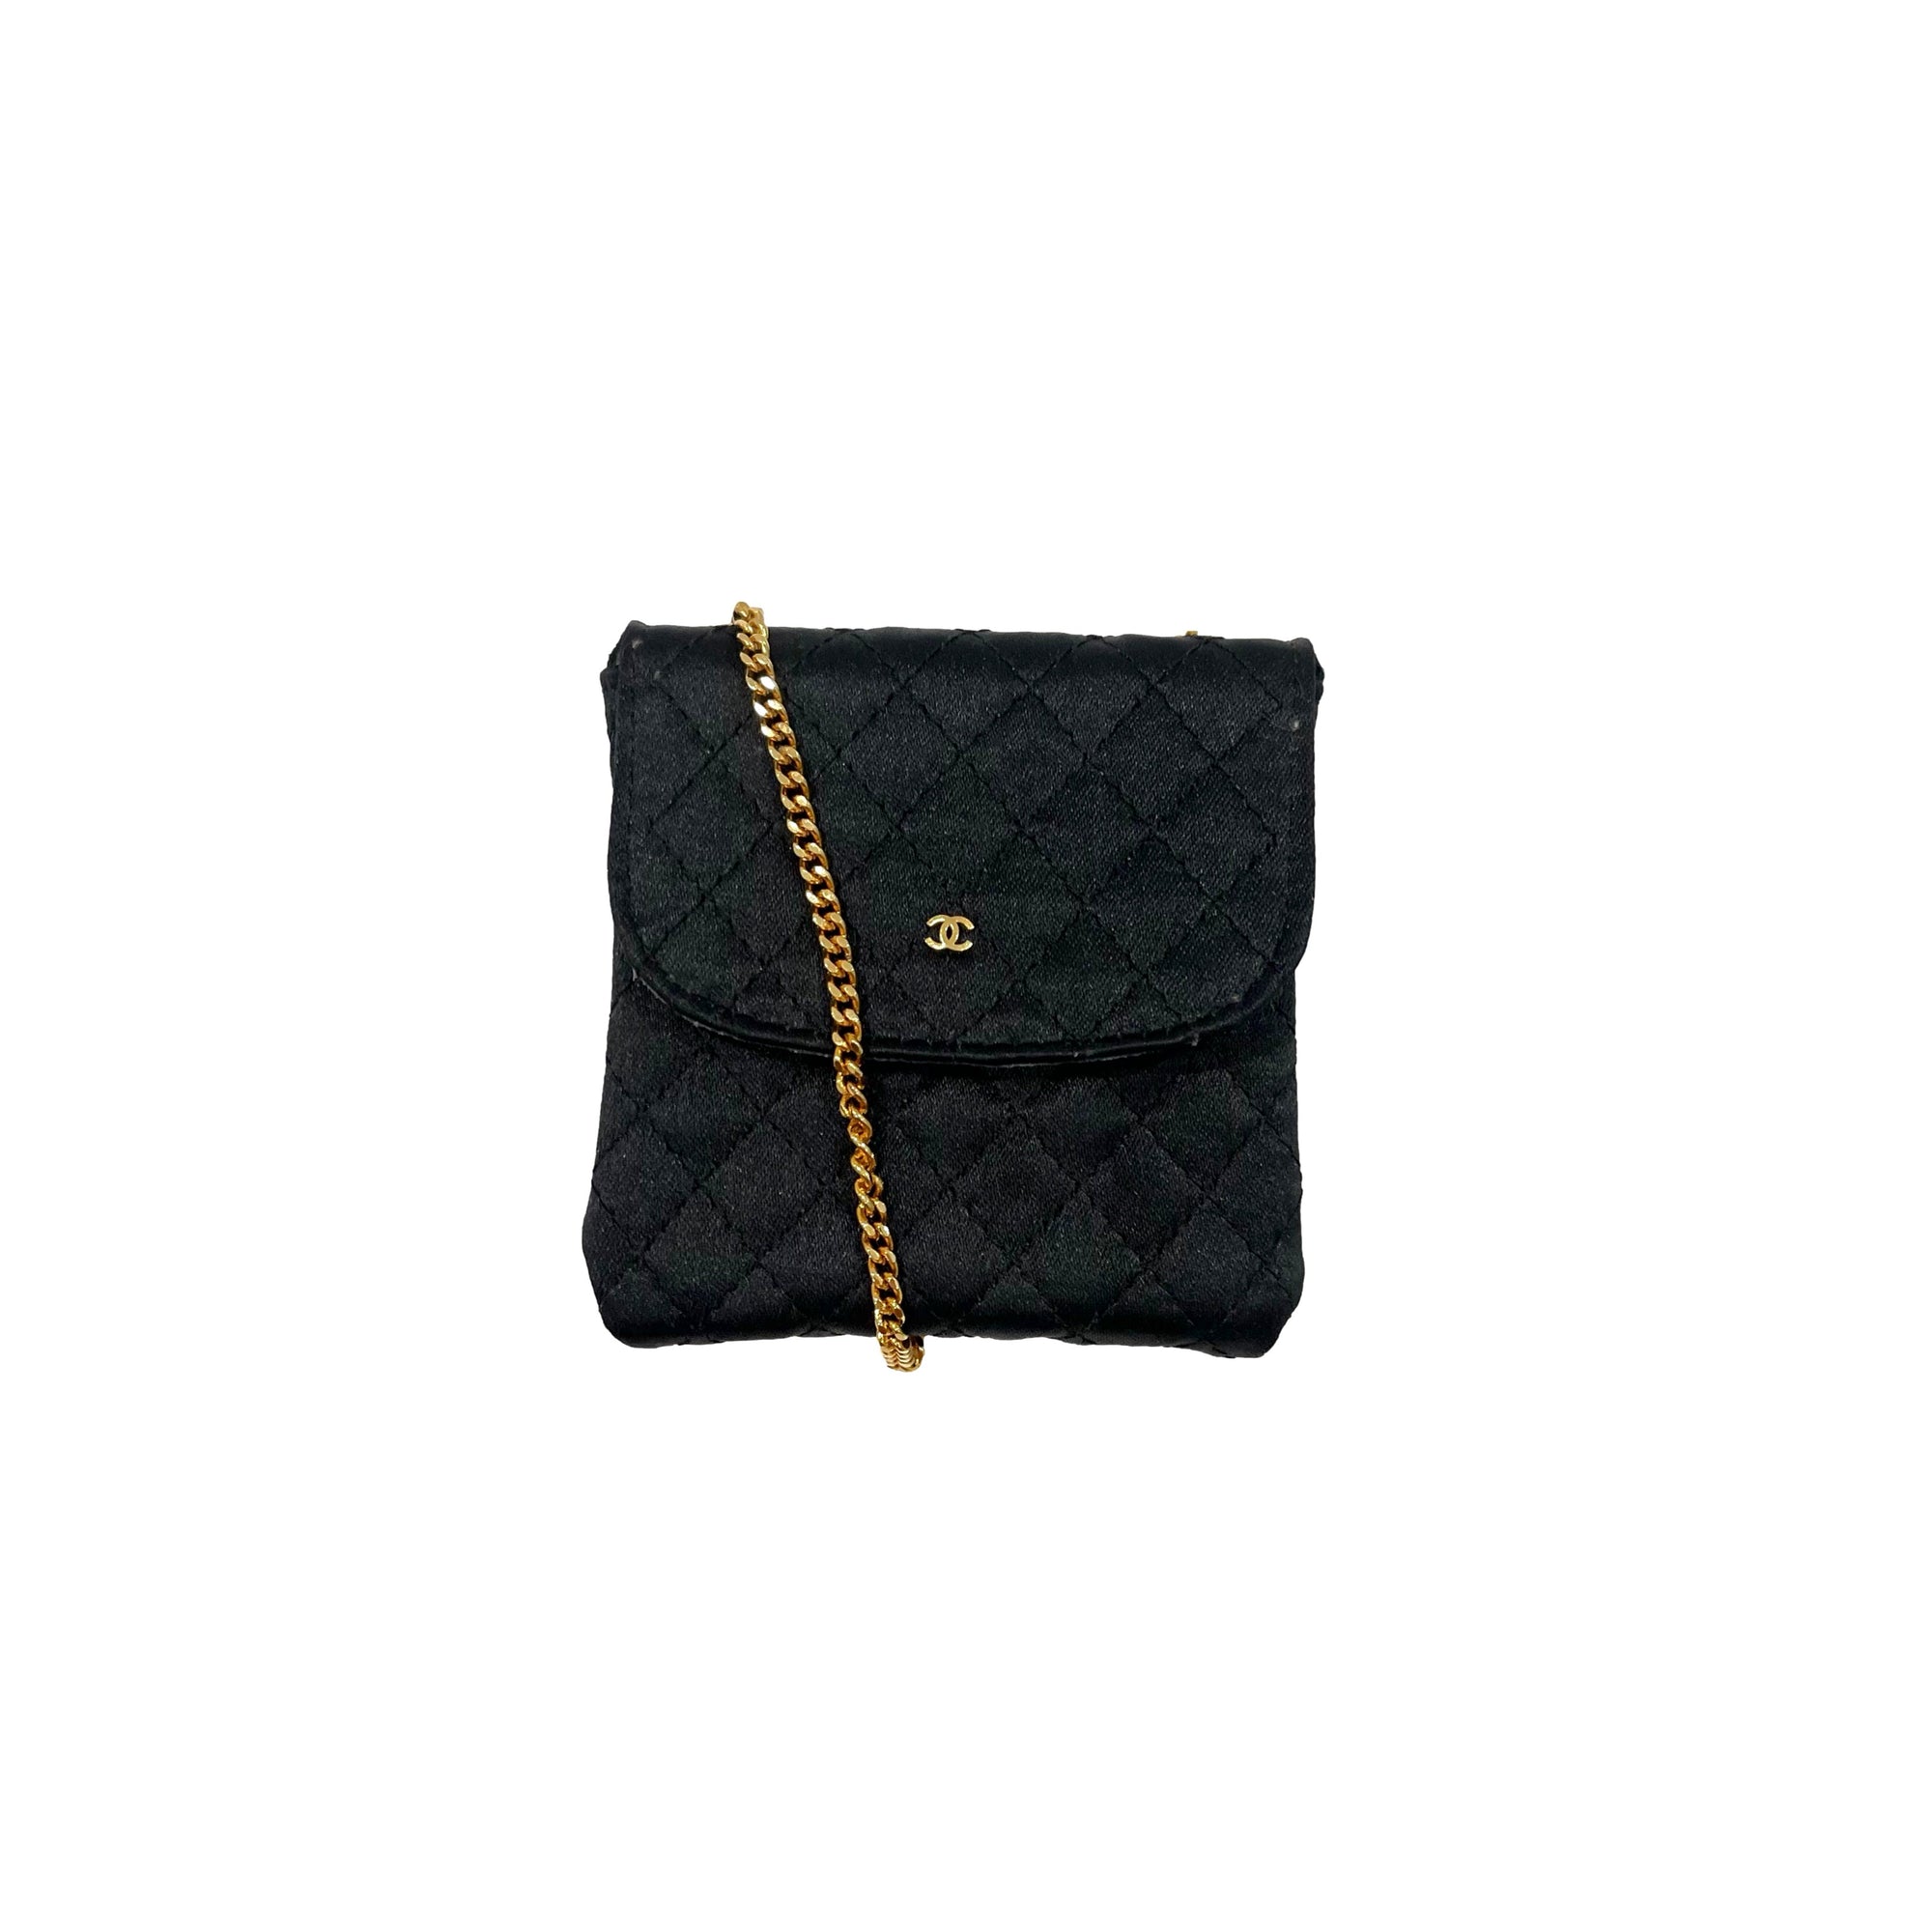 Chanel Black Quilted Micro Bag - Accessories